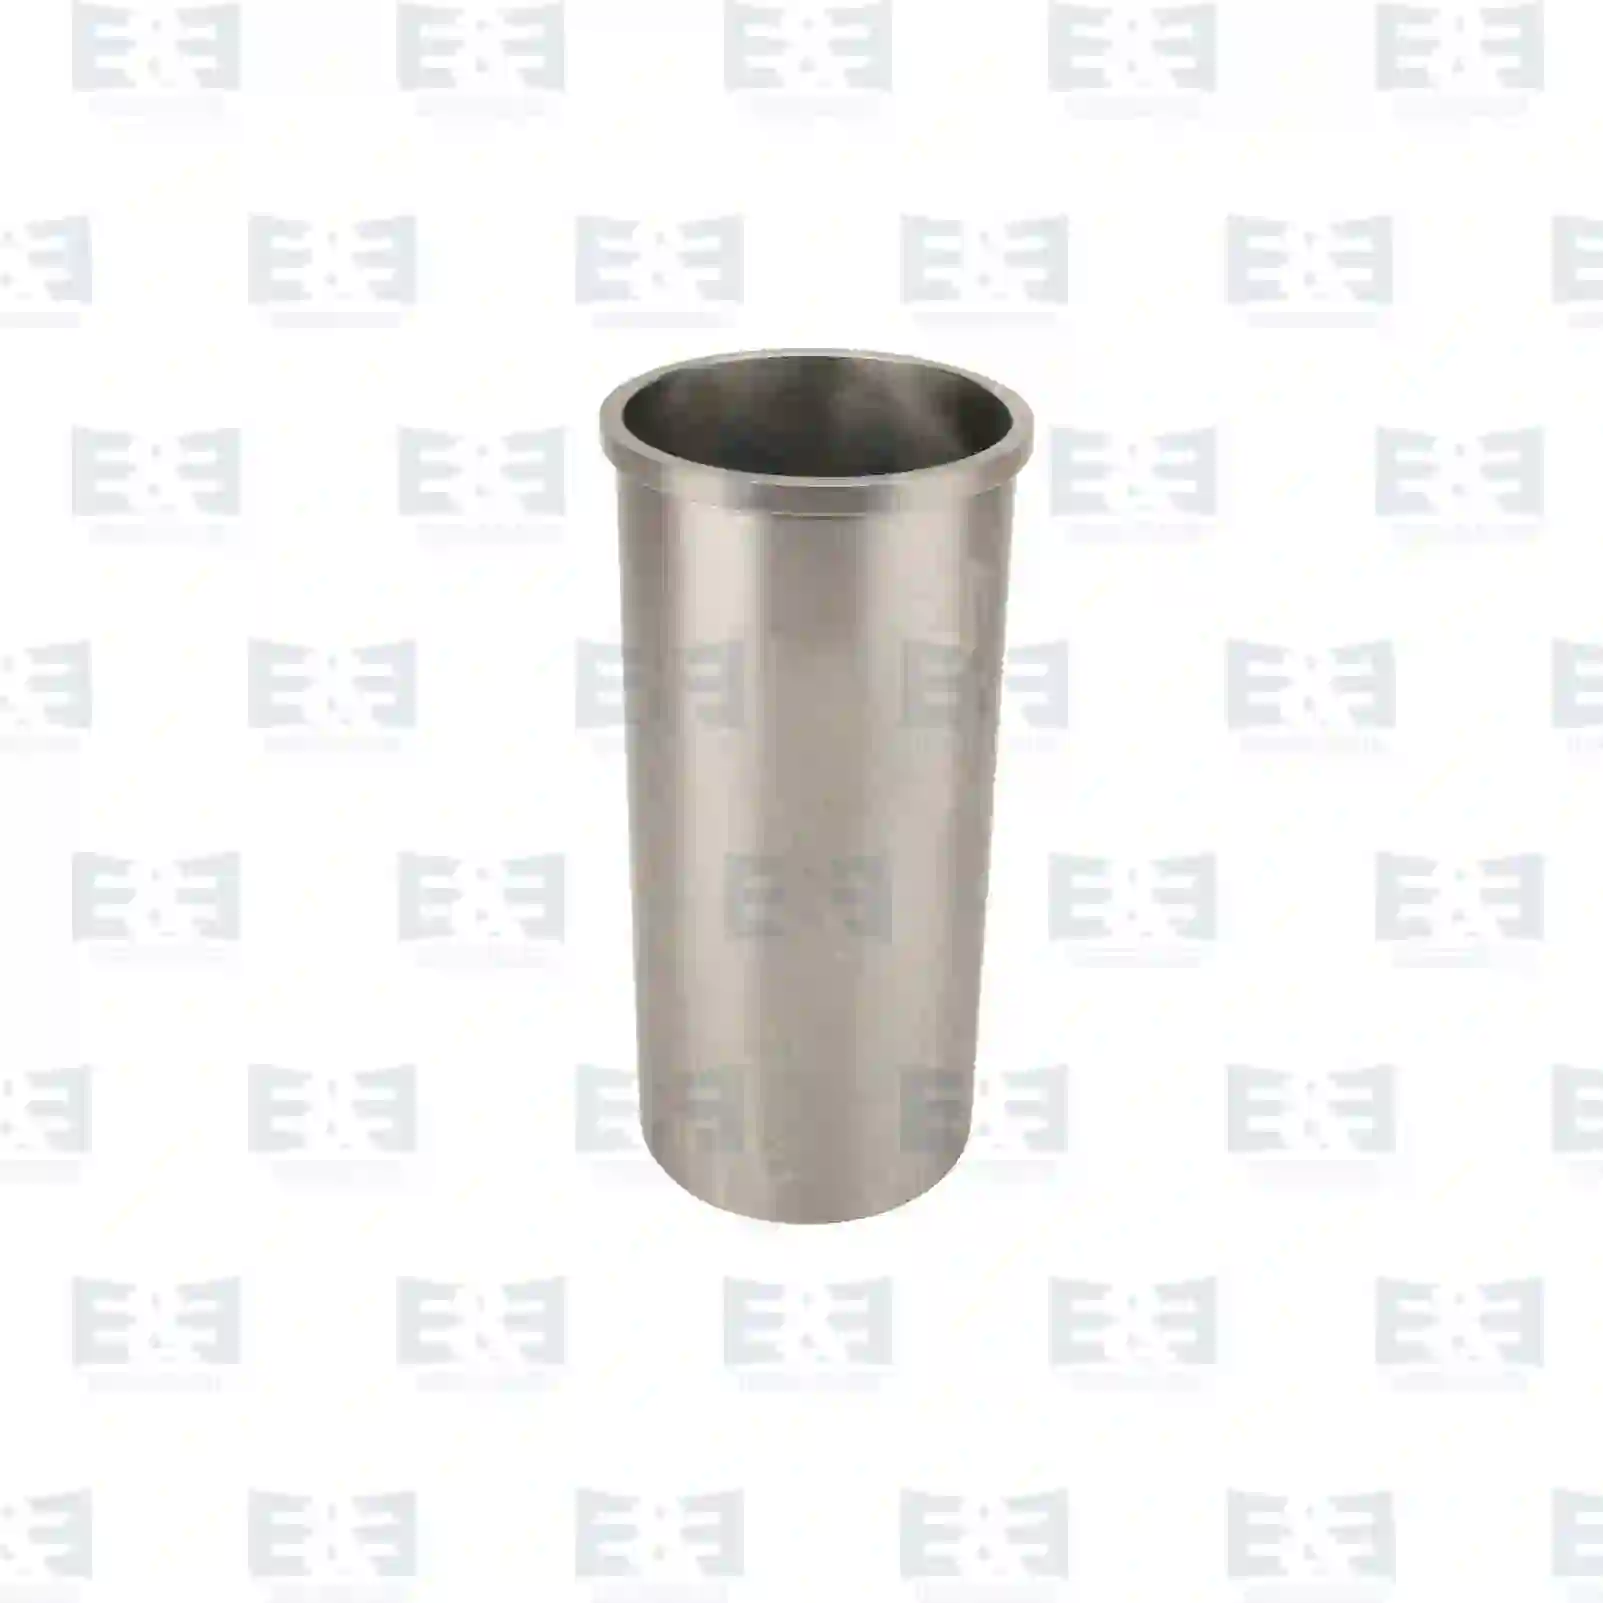 Cylinder liner, without seal rings, 2E2209907, 0240474, 0396855, 240474, 241116, 396855, ZG01083-0008 ||  2E2209907 E&E Truck Spare Parts | Truck Spare Parts, Auotomotive Spare Parts Cylinder liner, without seal rings, 2E2209907, 0240474, 0396855, 240474, 241116, 396855, ZG01083-0008 ||  2E2209907 E&E Truck Spare Parts | Truck Spare Parts, Auotomotive Spare Parts